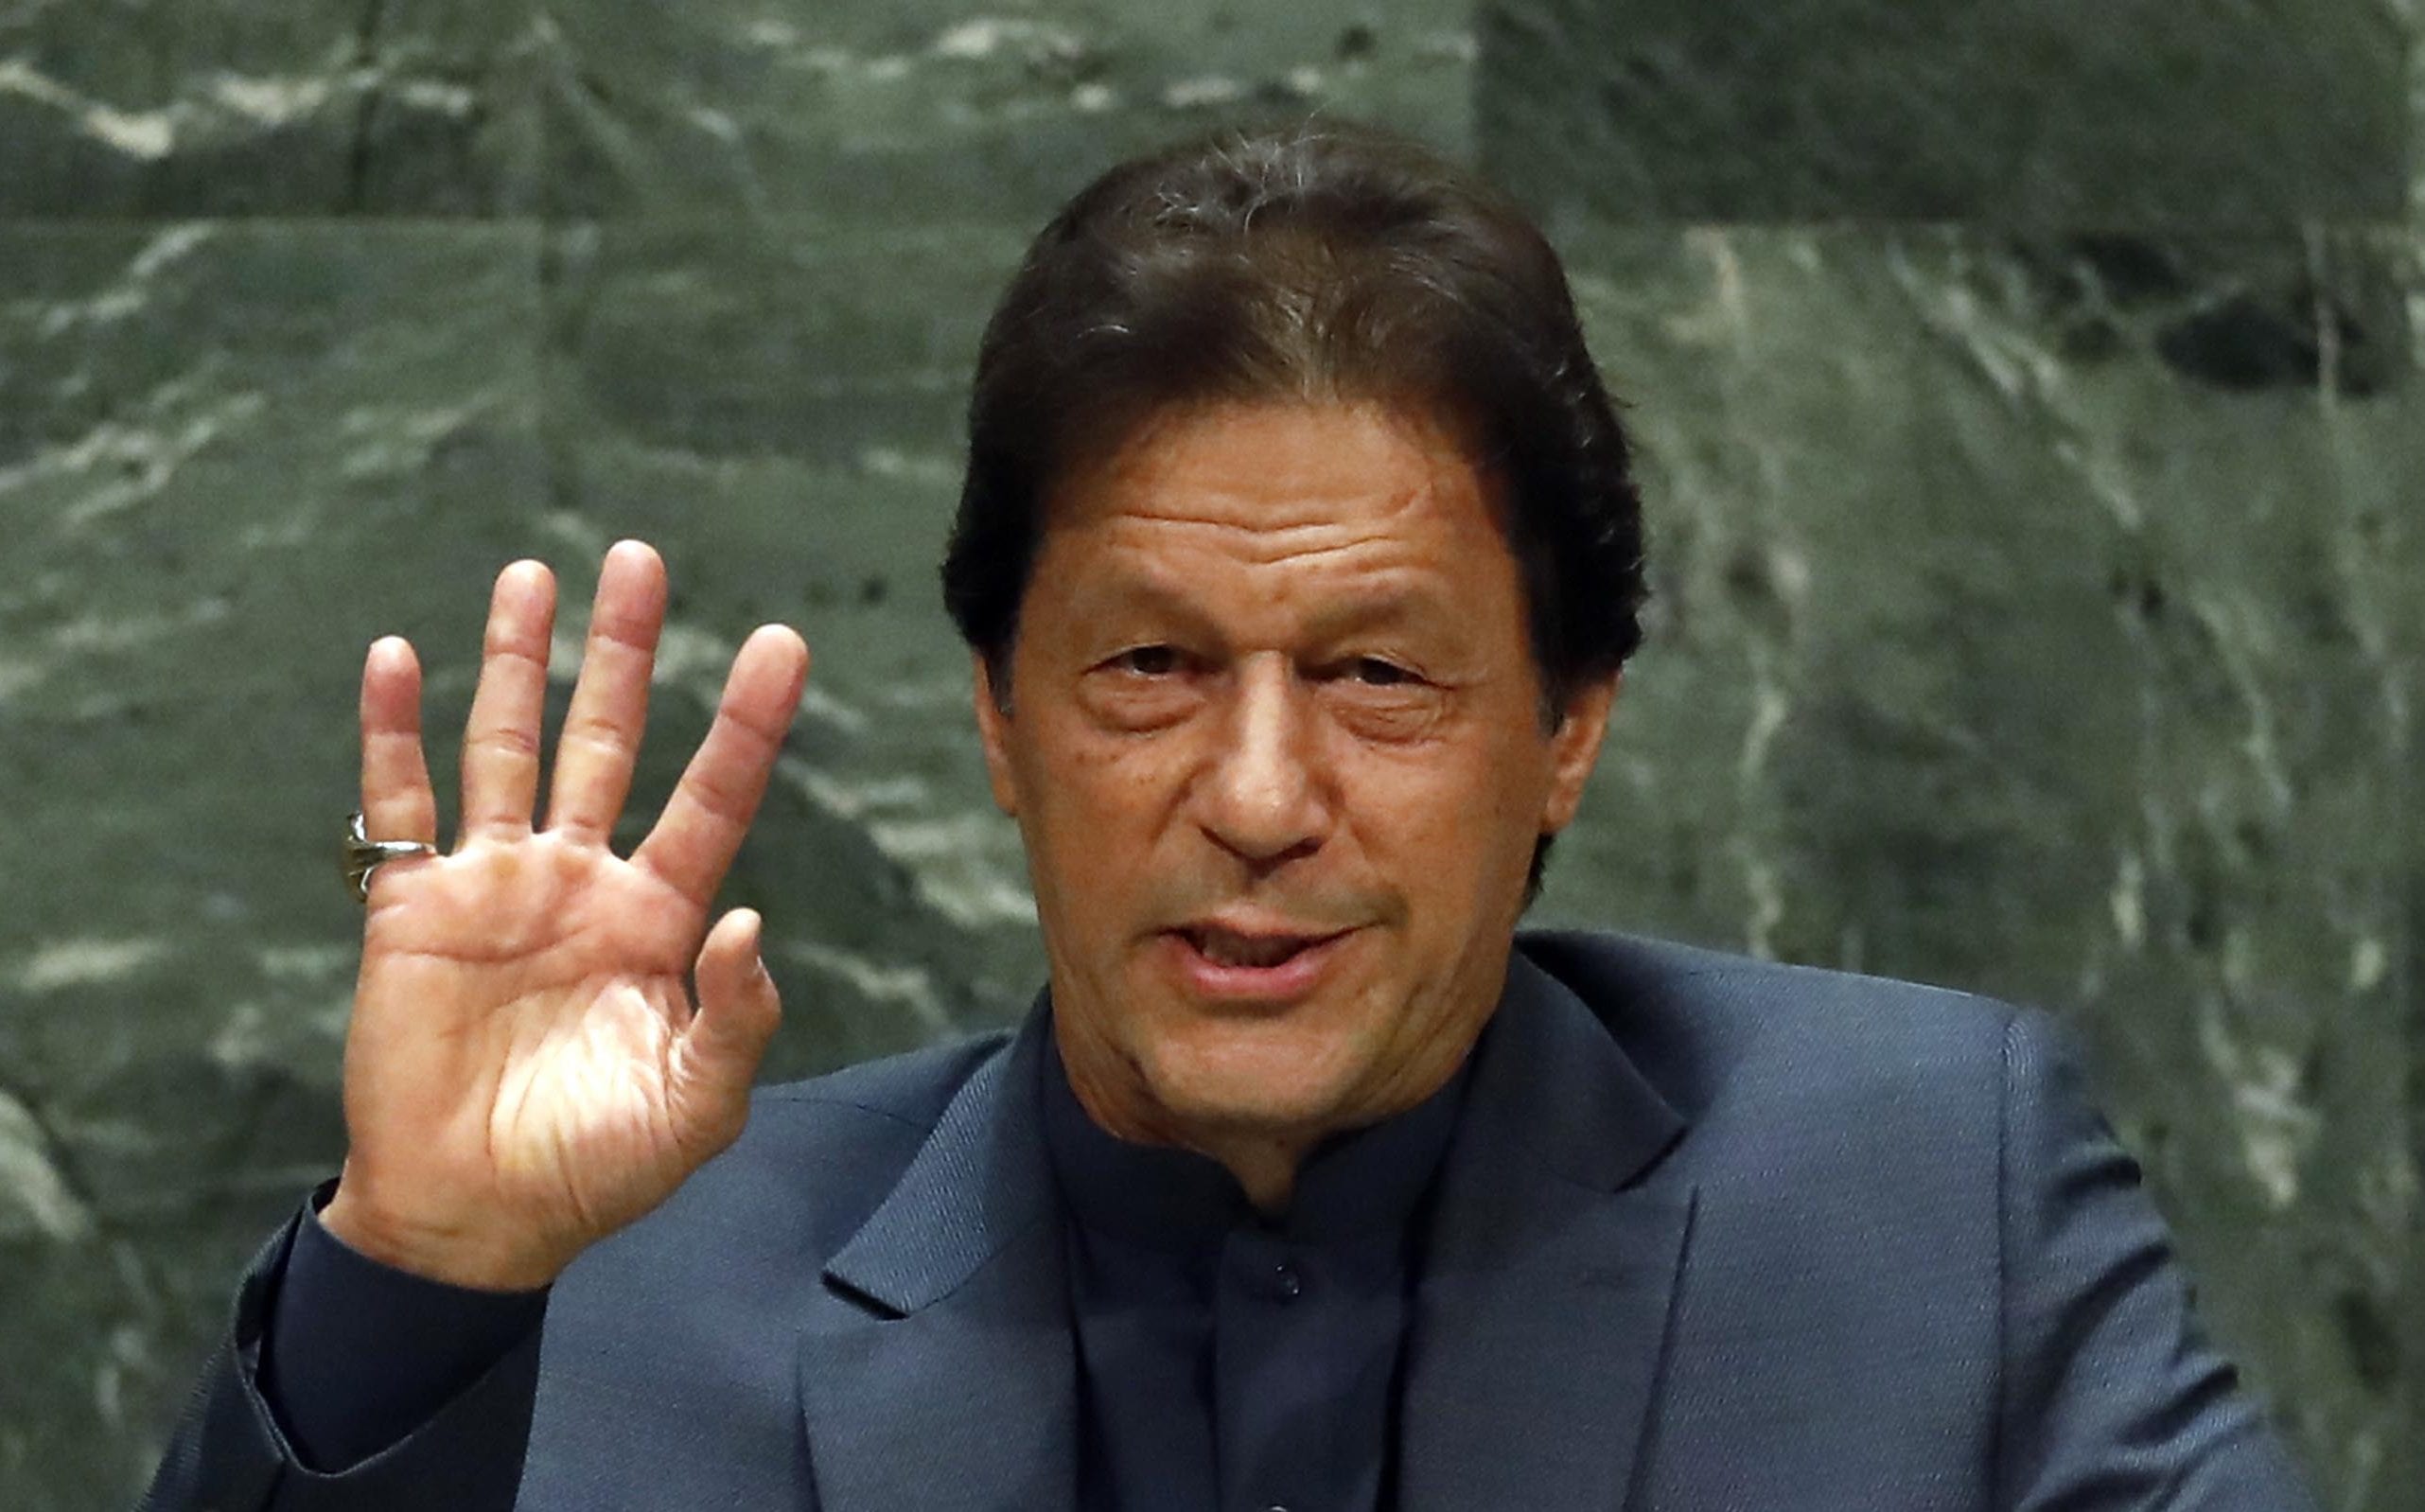 World ignored Kashmir due to Indias booming market, says Imran